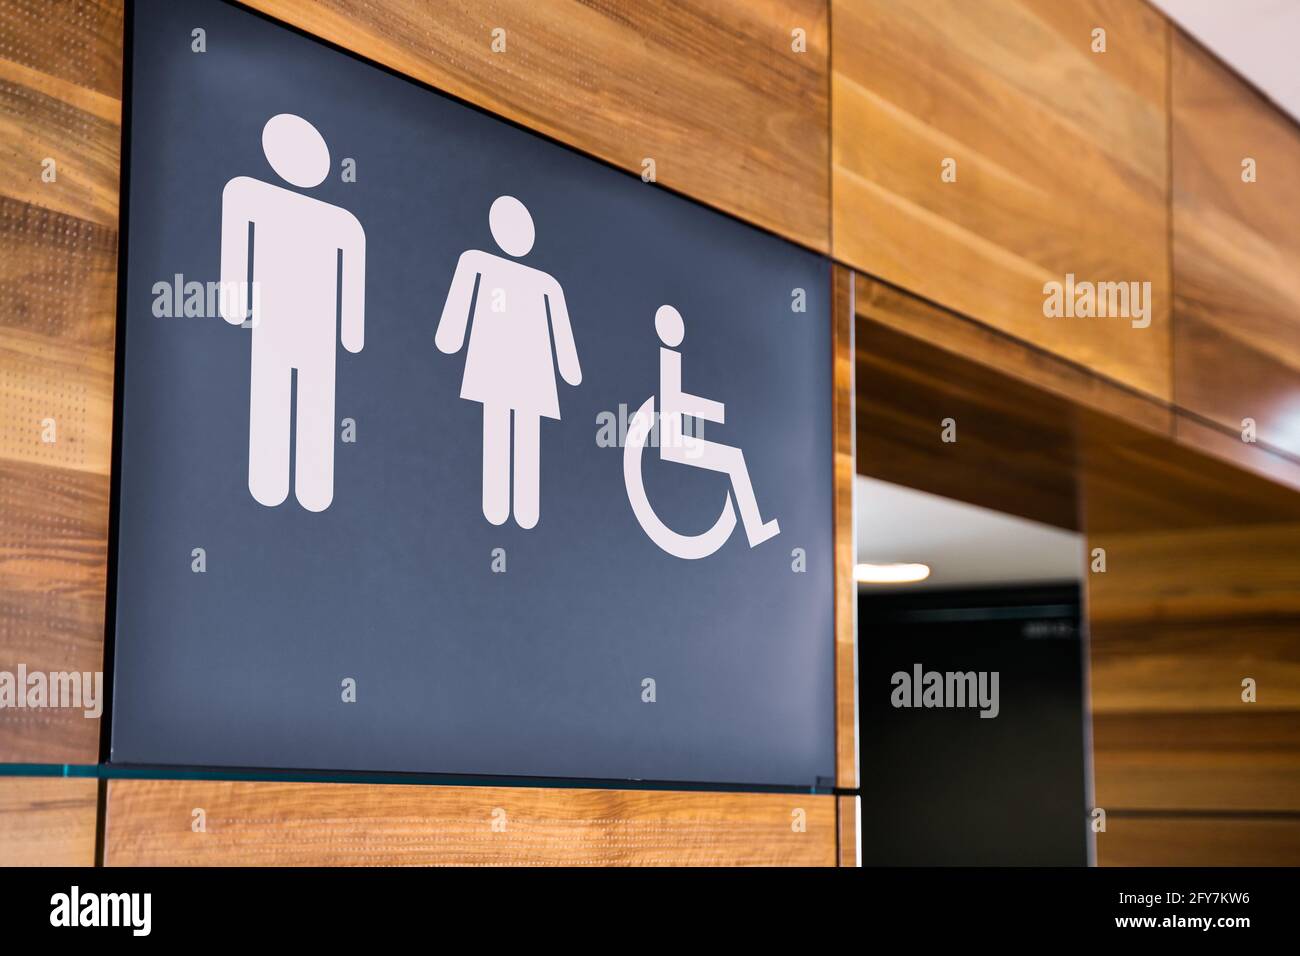 Disabled Or Handicapped Person Public Restroom Sign Stock Photo